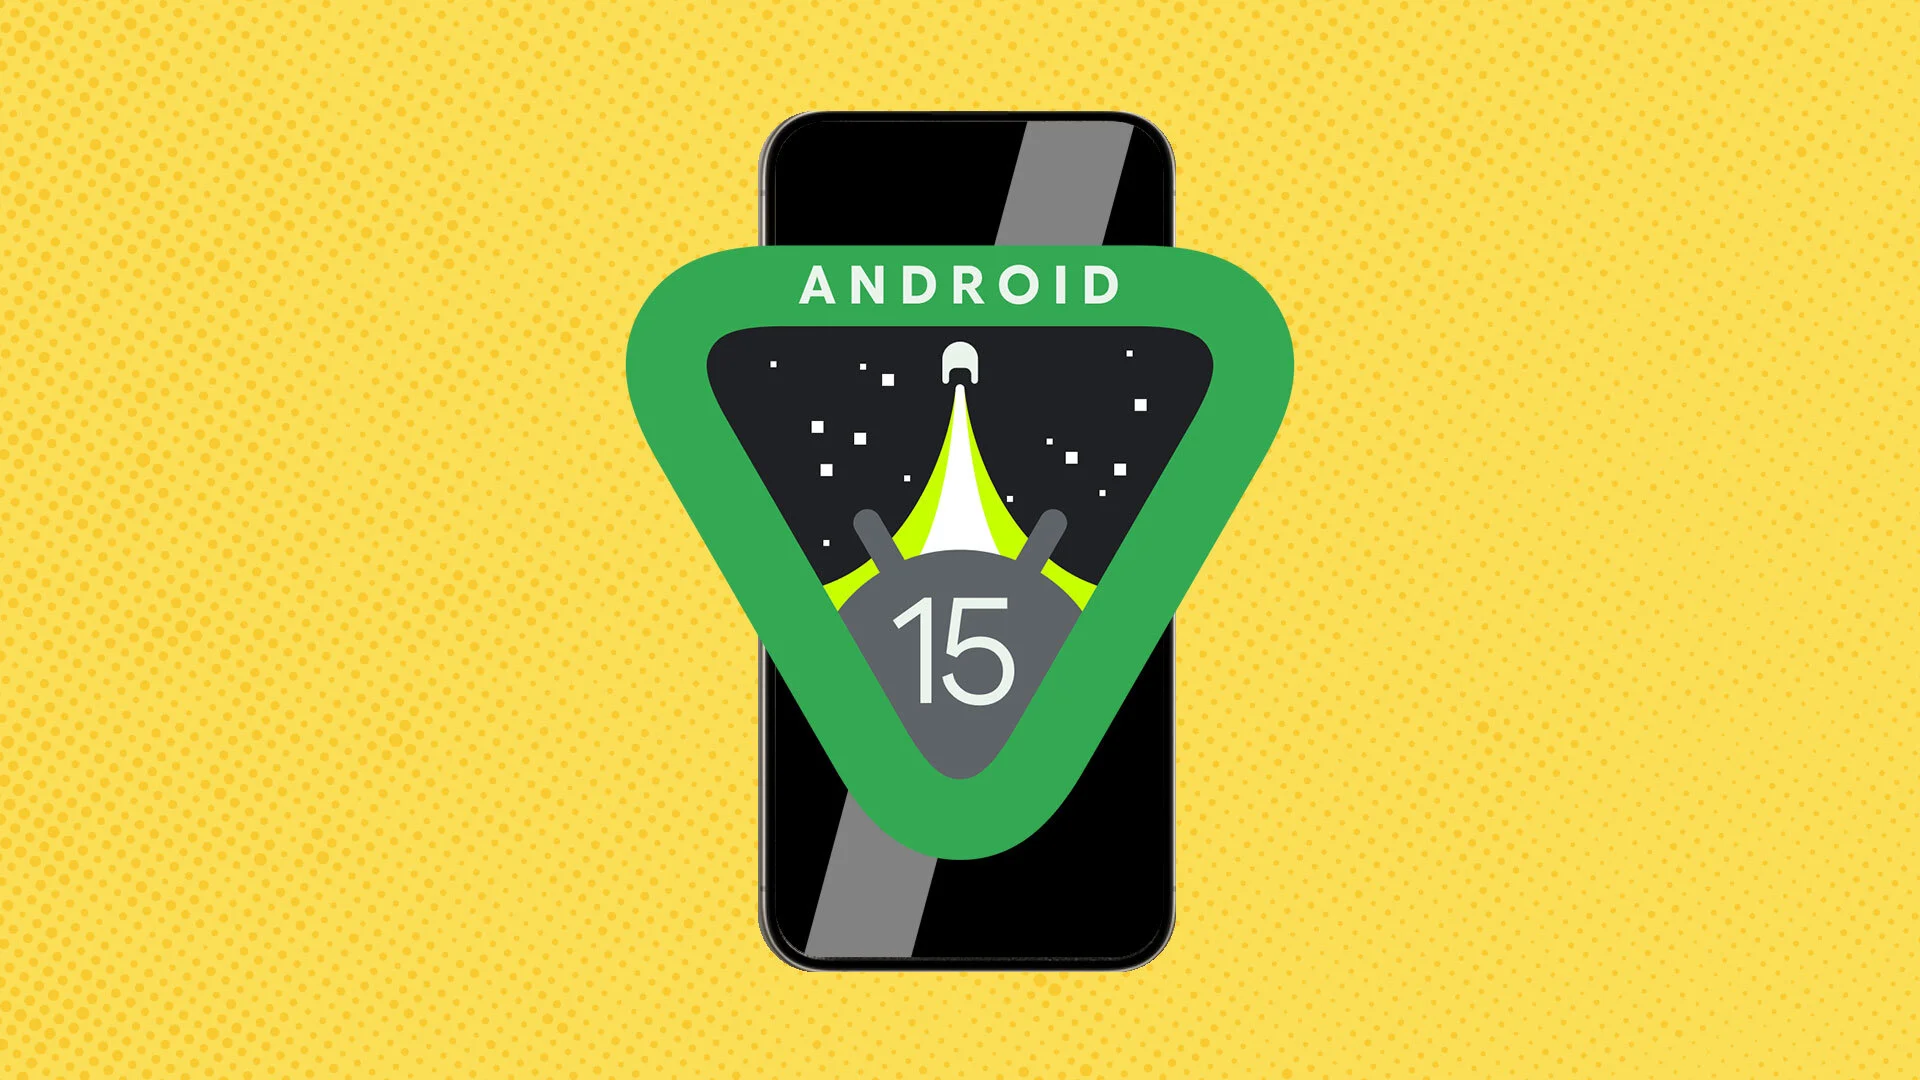 Google's Android 15 logo includes a graphic of a space launch against a starfield backdrop.